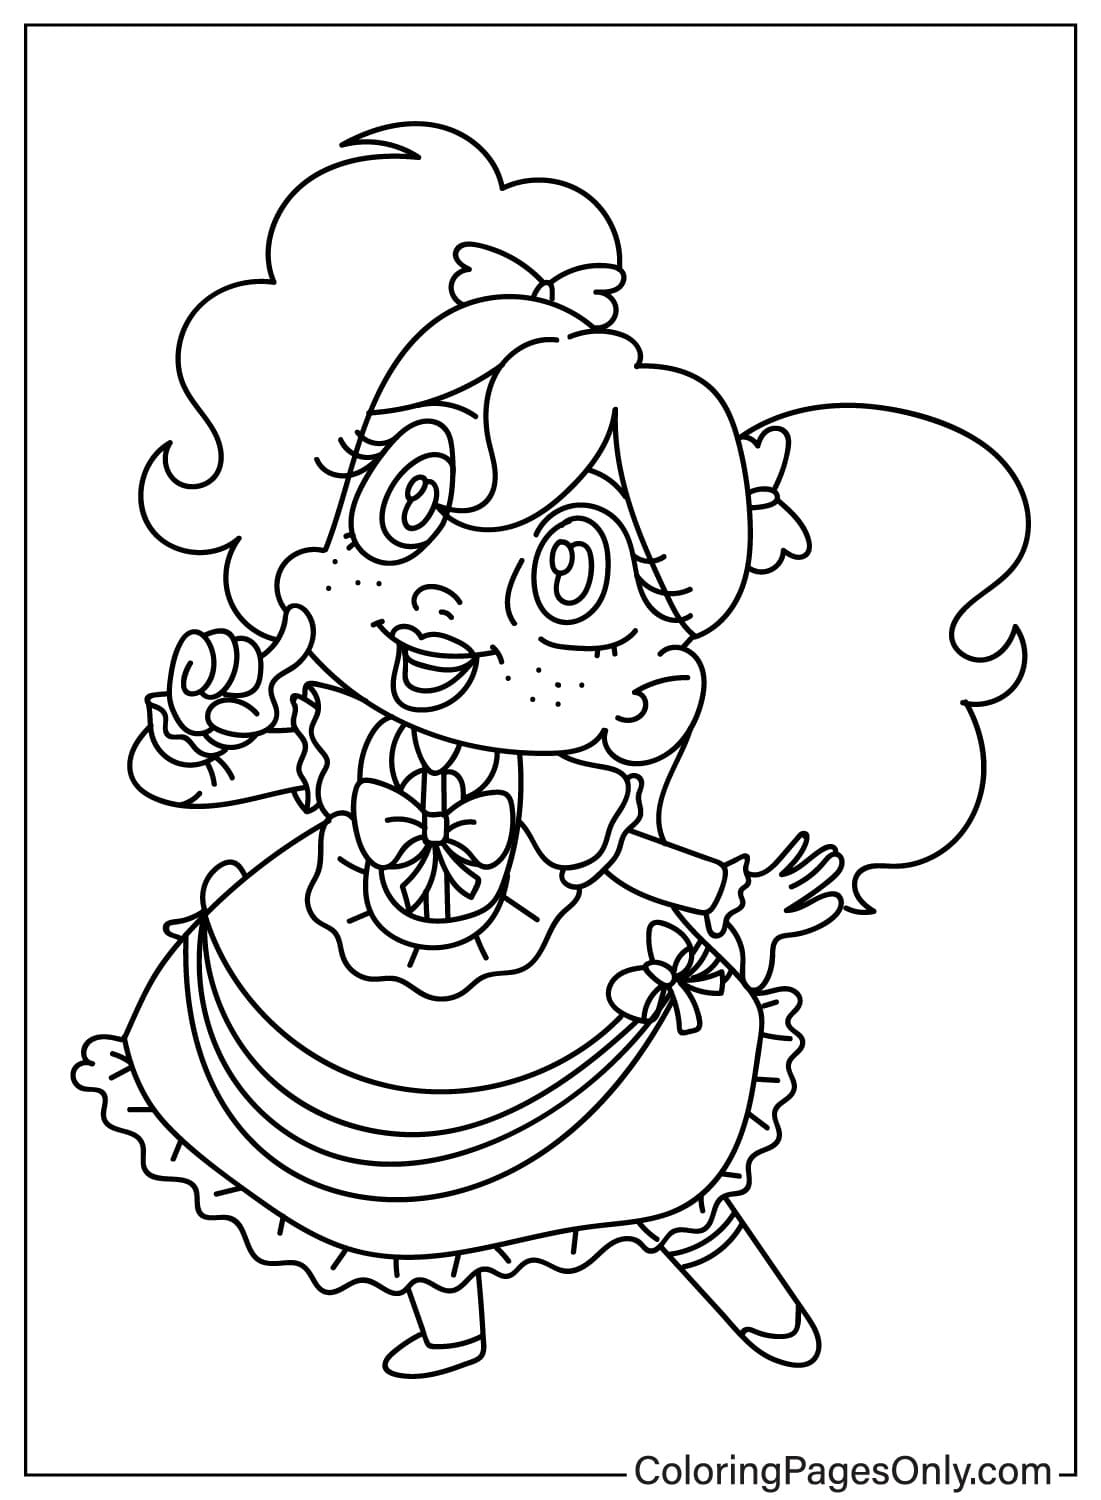 Doll Poppy Playtime Coloring Page from Poppy Playtime